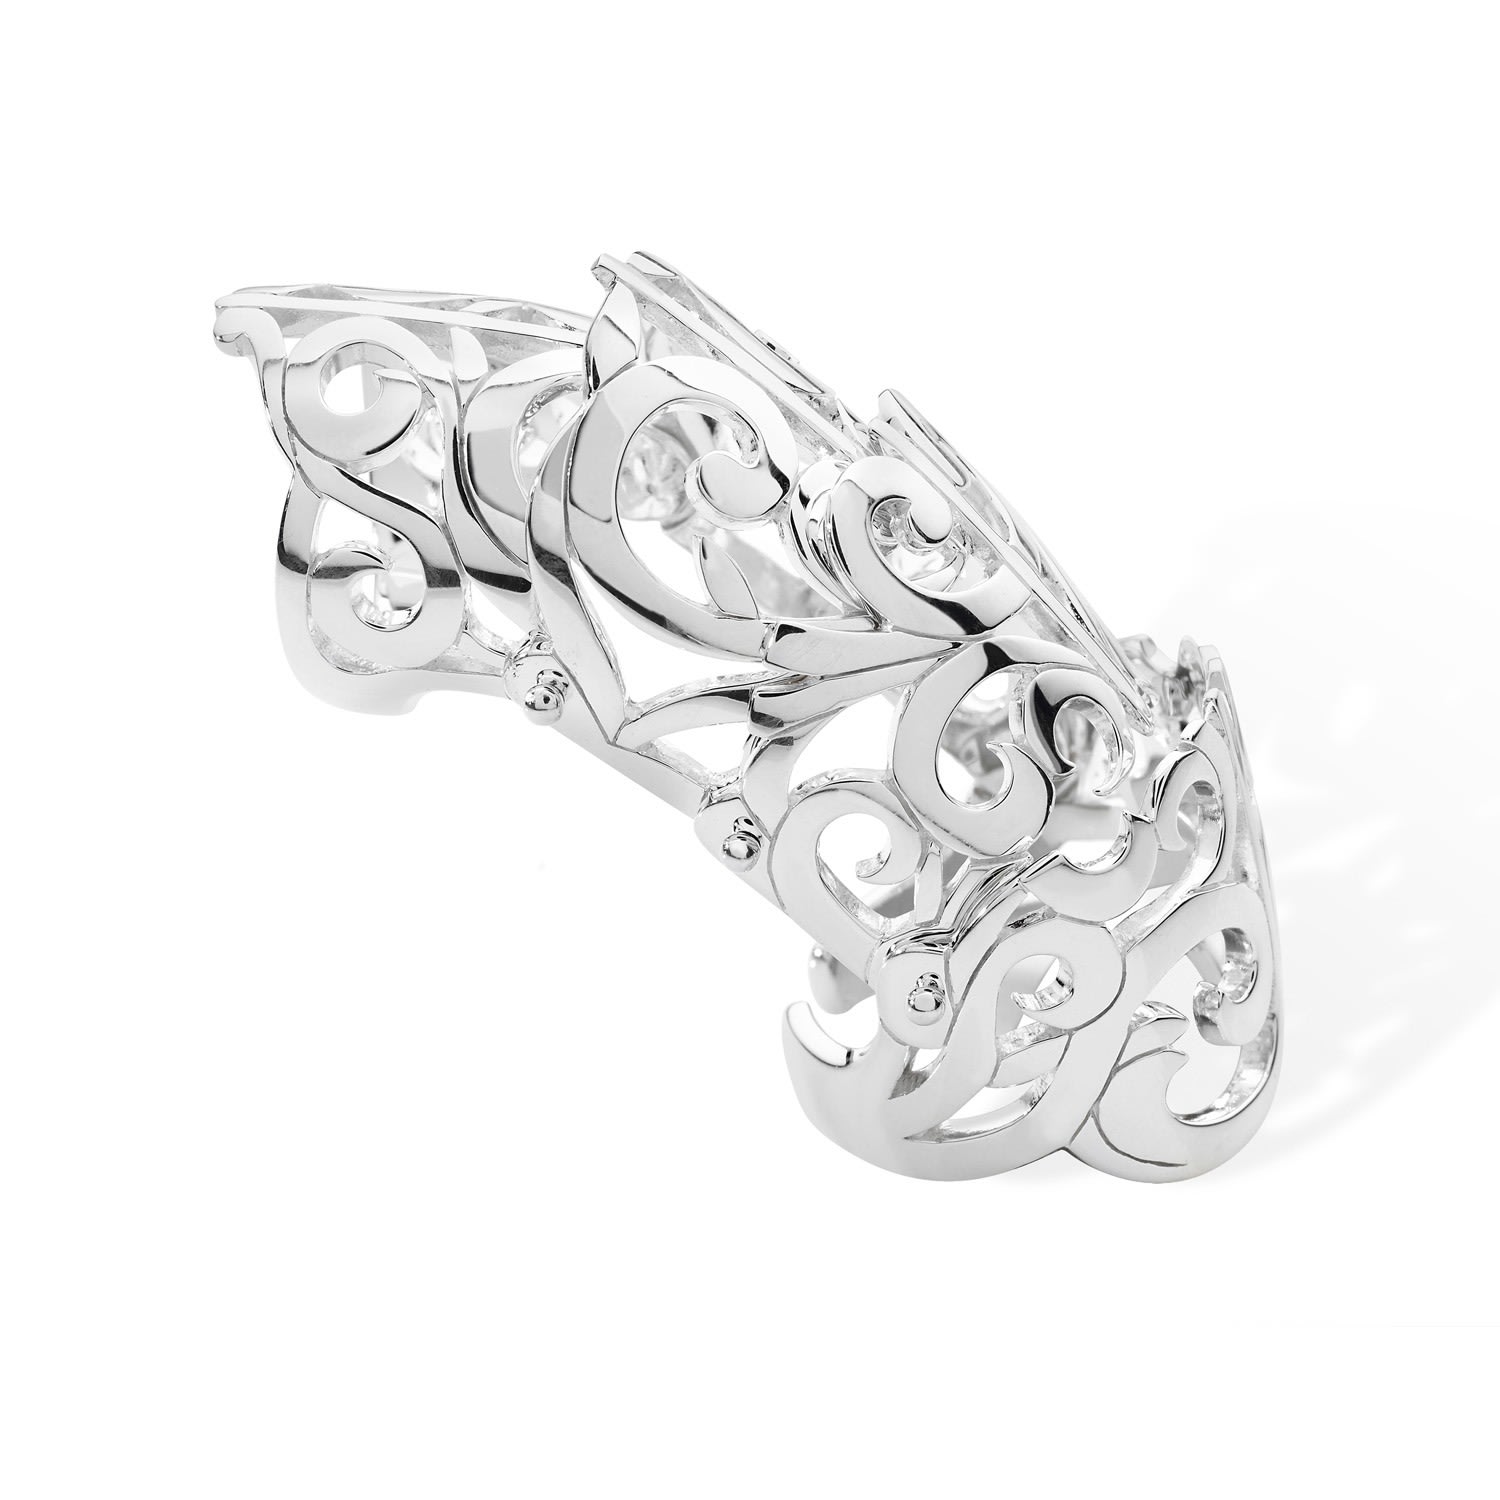 Lucy Quartermaine Women's Silver Elements Full Armour Ring